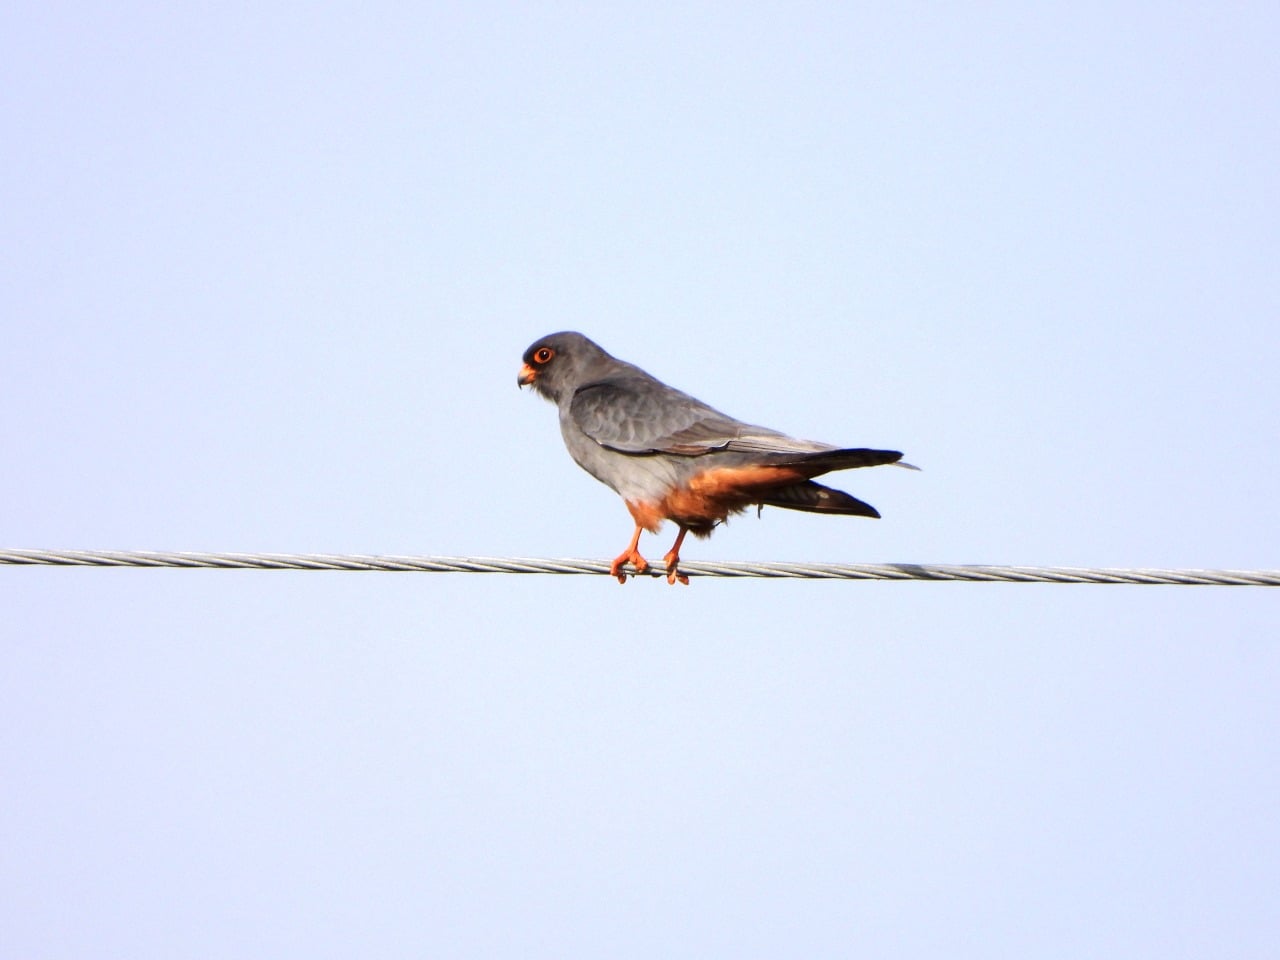 RED-FOOTED FALCON (FALCO VESPERTINUS) ROOSTING SITE DISCOVERED FOR THE FIRST TIME IN ALBANIA